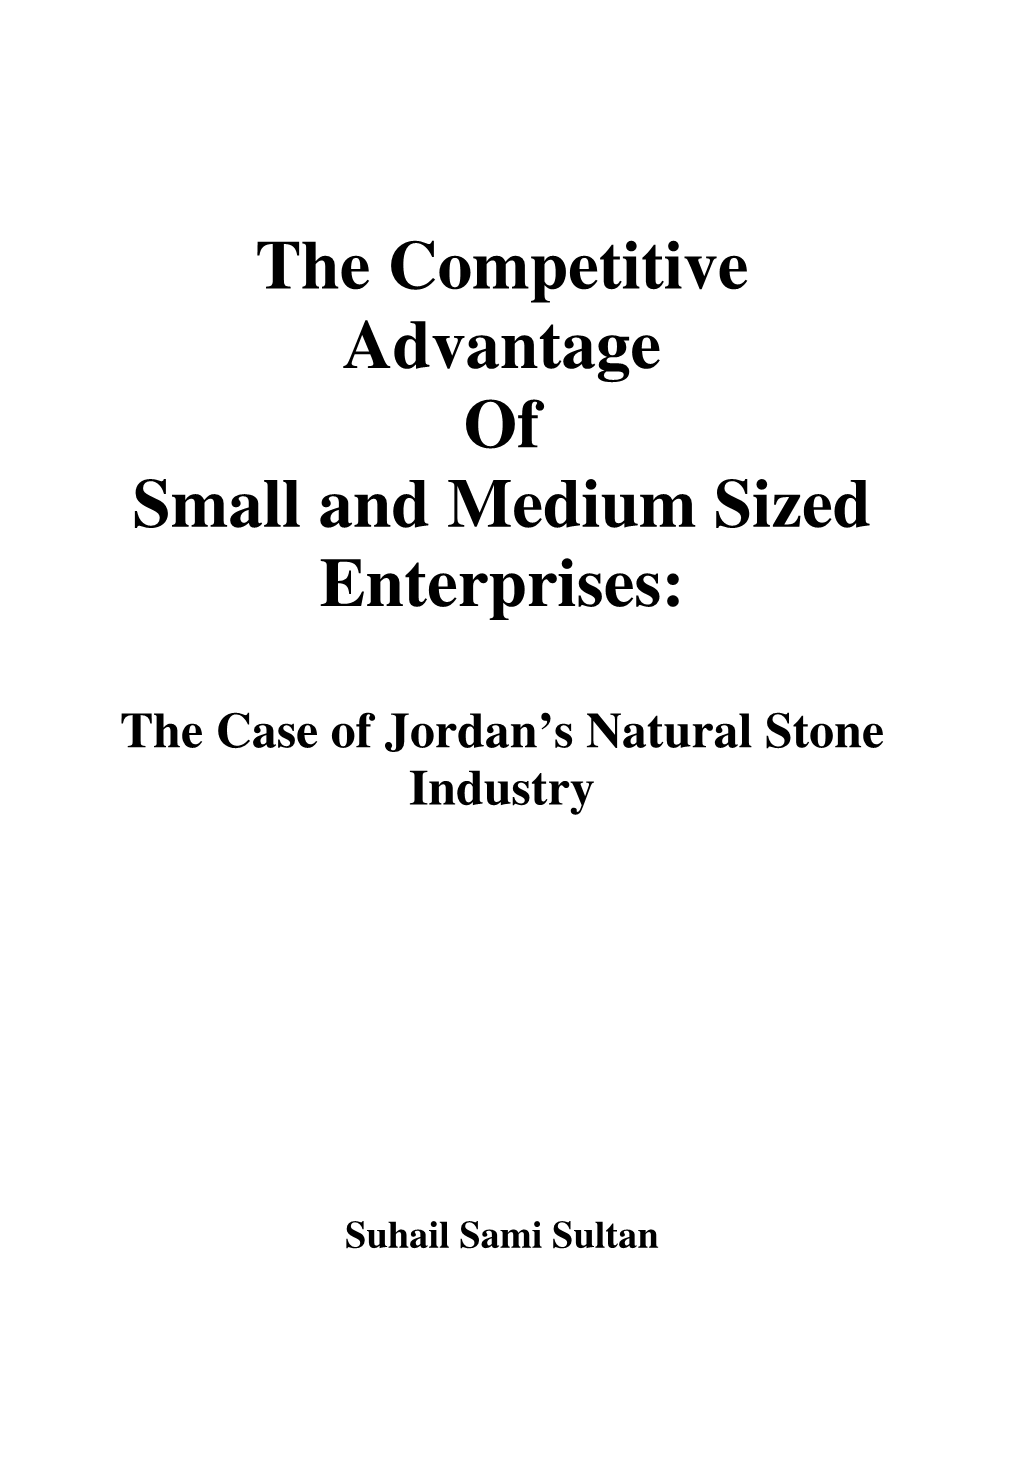 The Competitive Advantage of Small and Medium Sized Enterprises